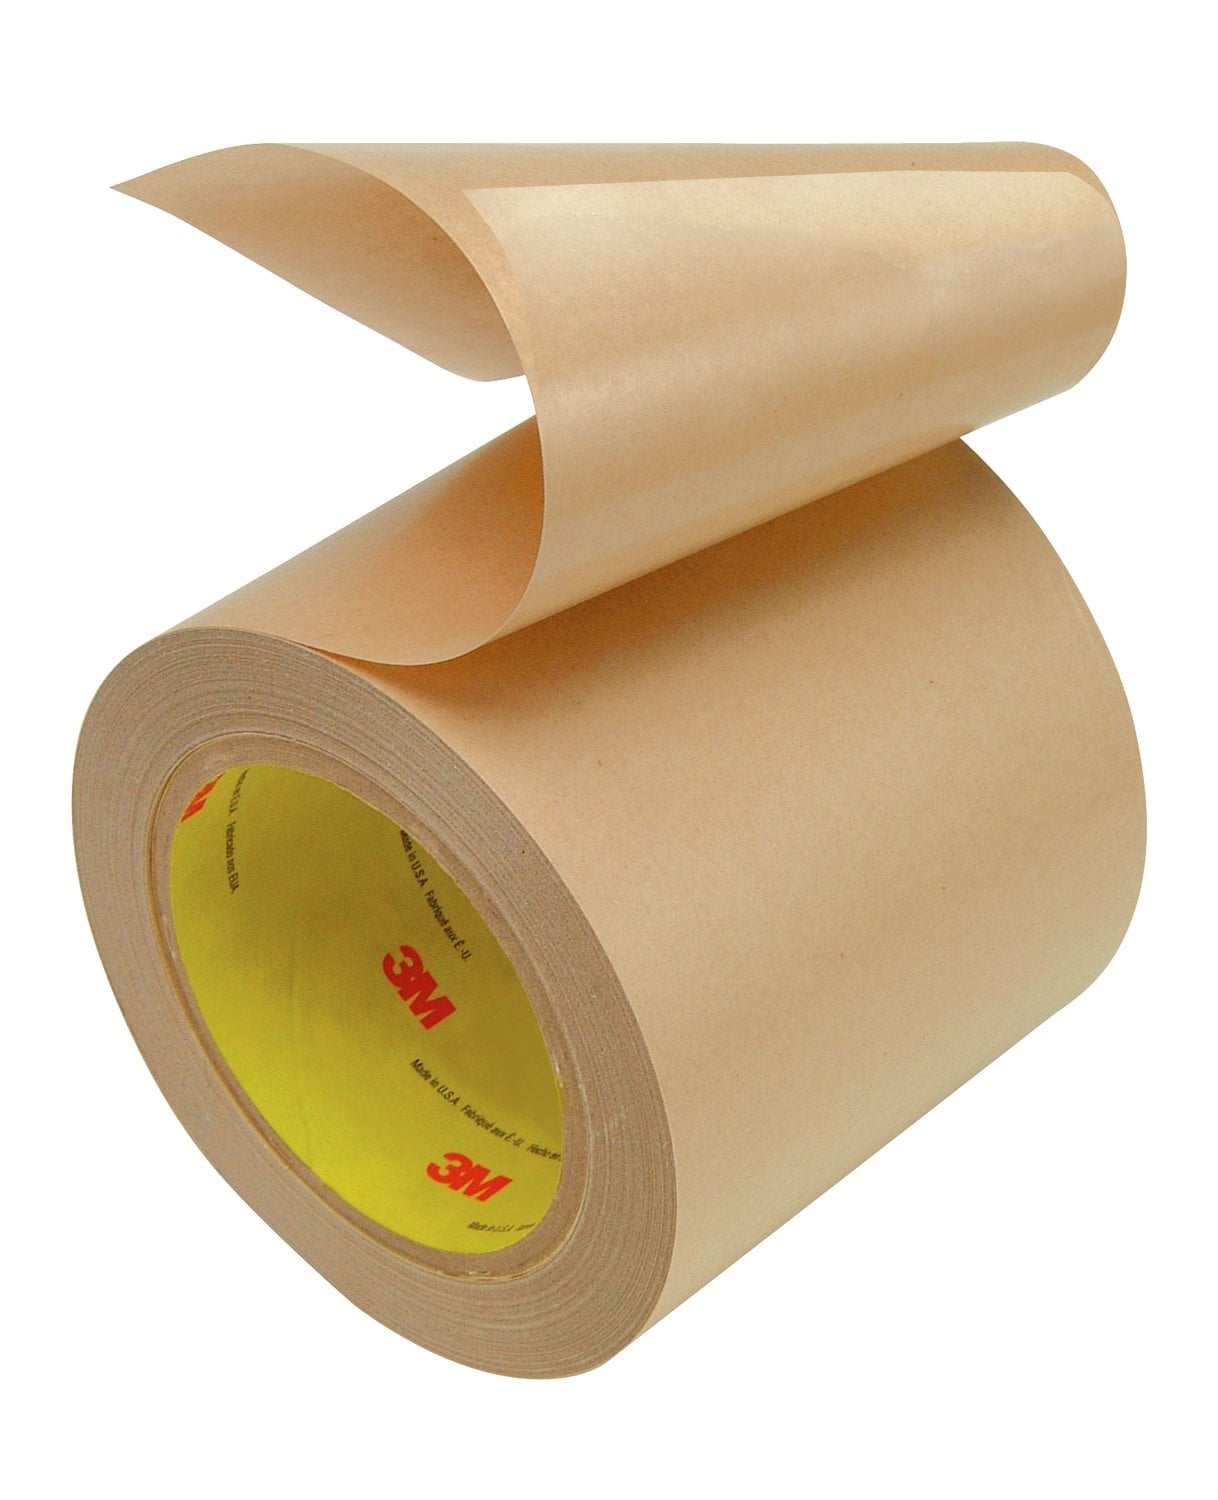 7000048745 - 3M Electrically Conductive Adhesive Transfer Tape 9703, 6 in x 36 yds,
2 rolls per case